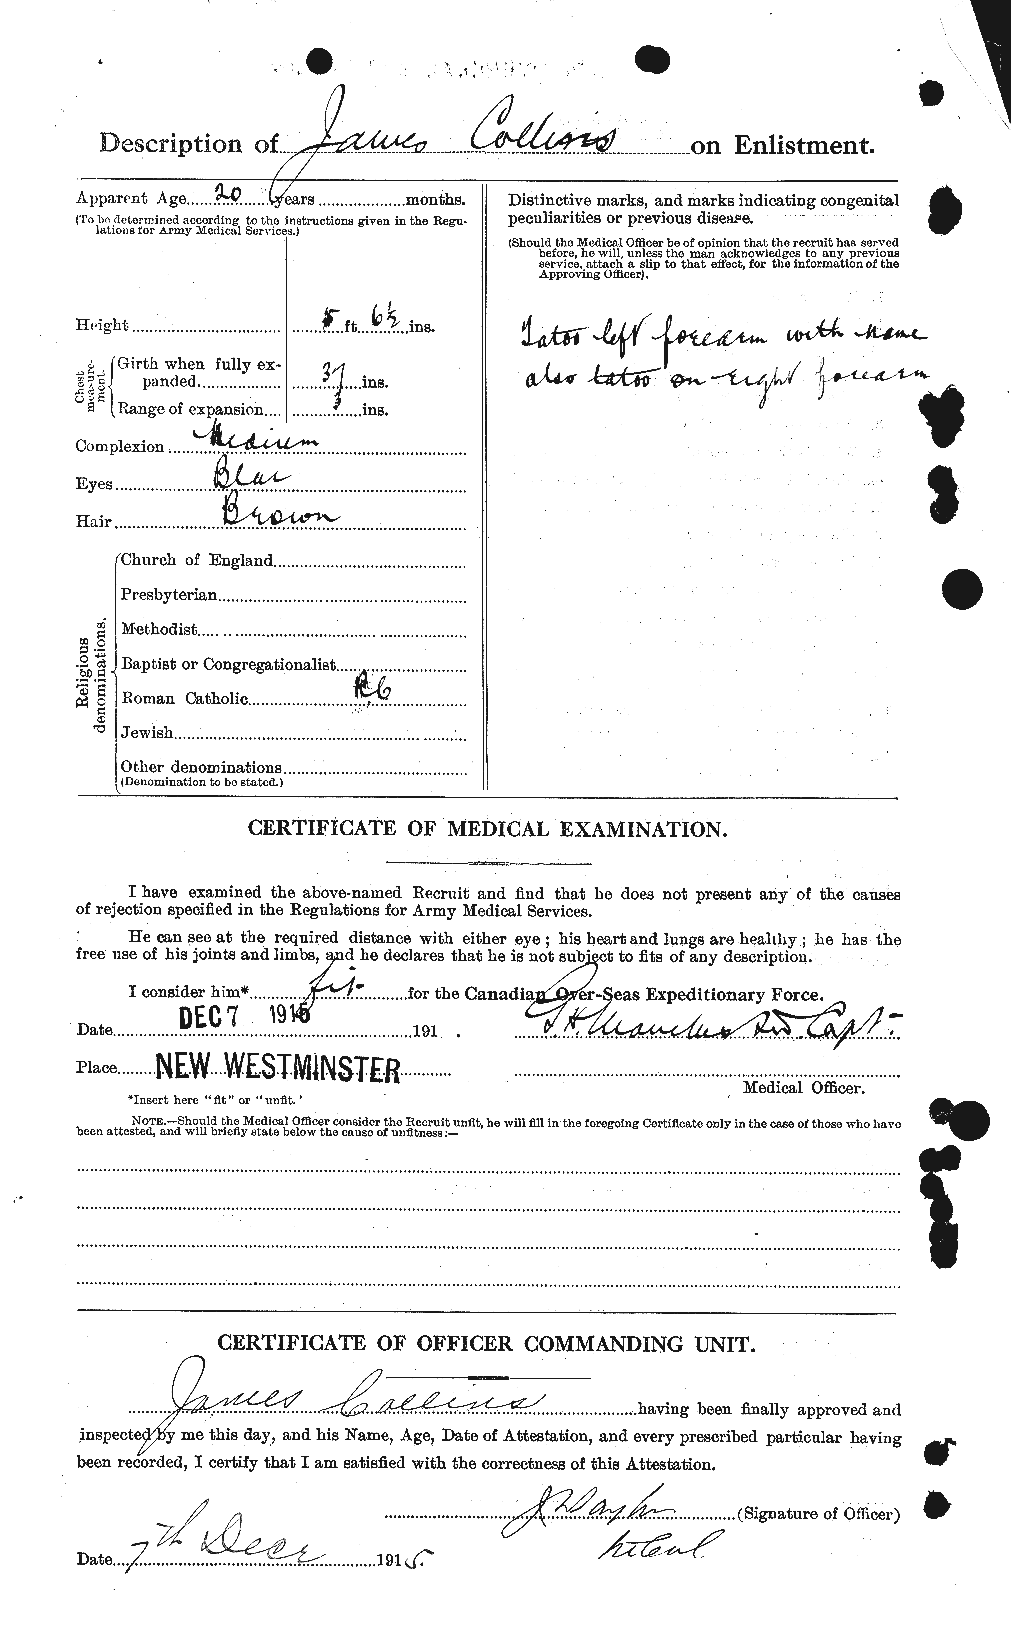 Personnel Records of the First World War - CEF 069978b